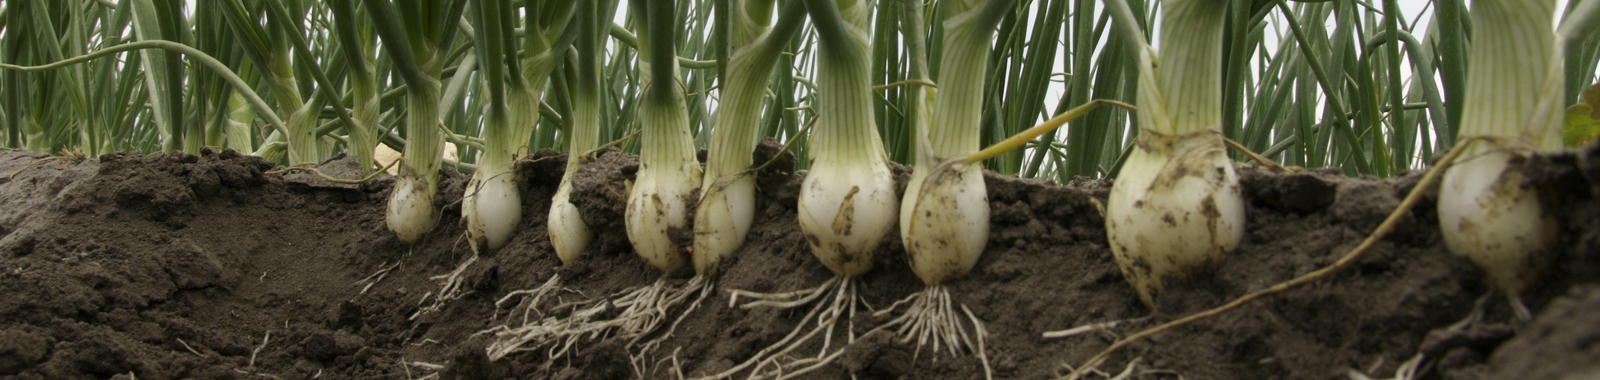 Role of Boron in Onion Production